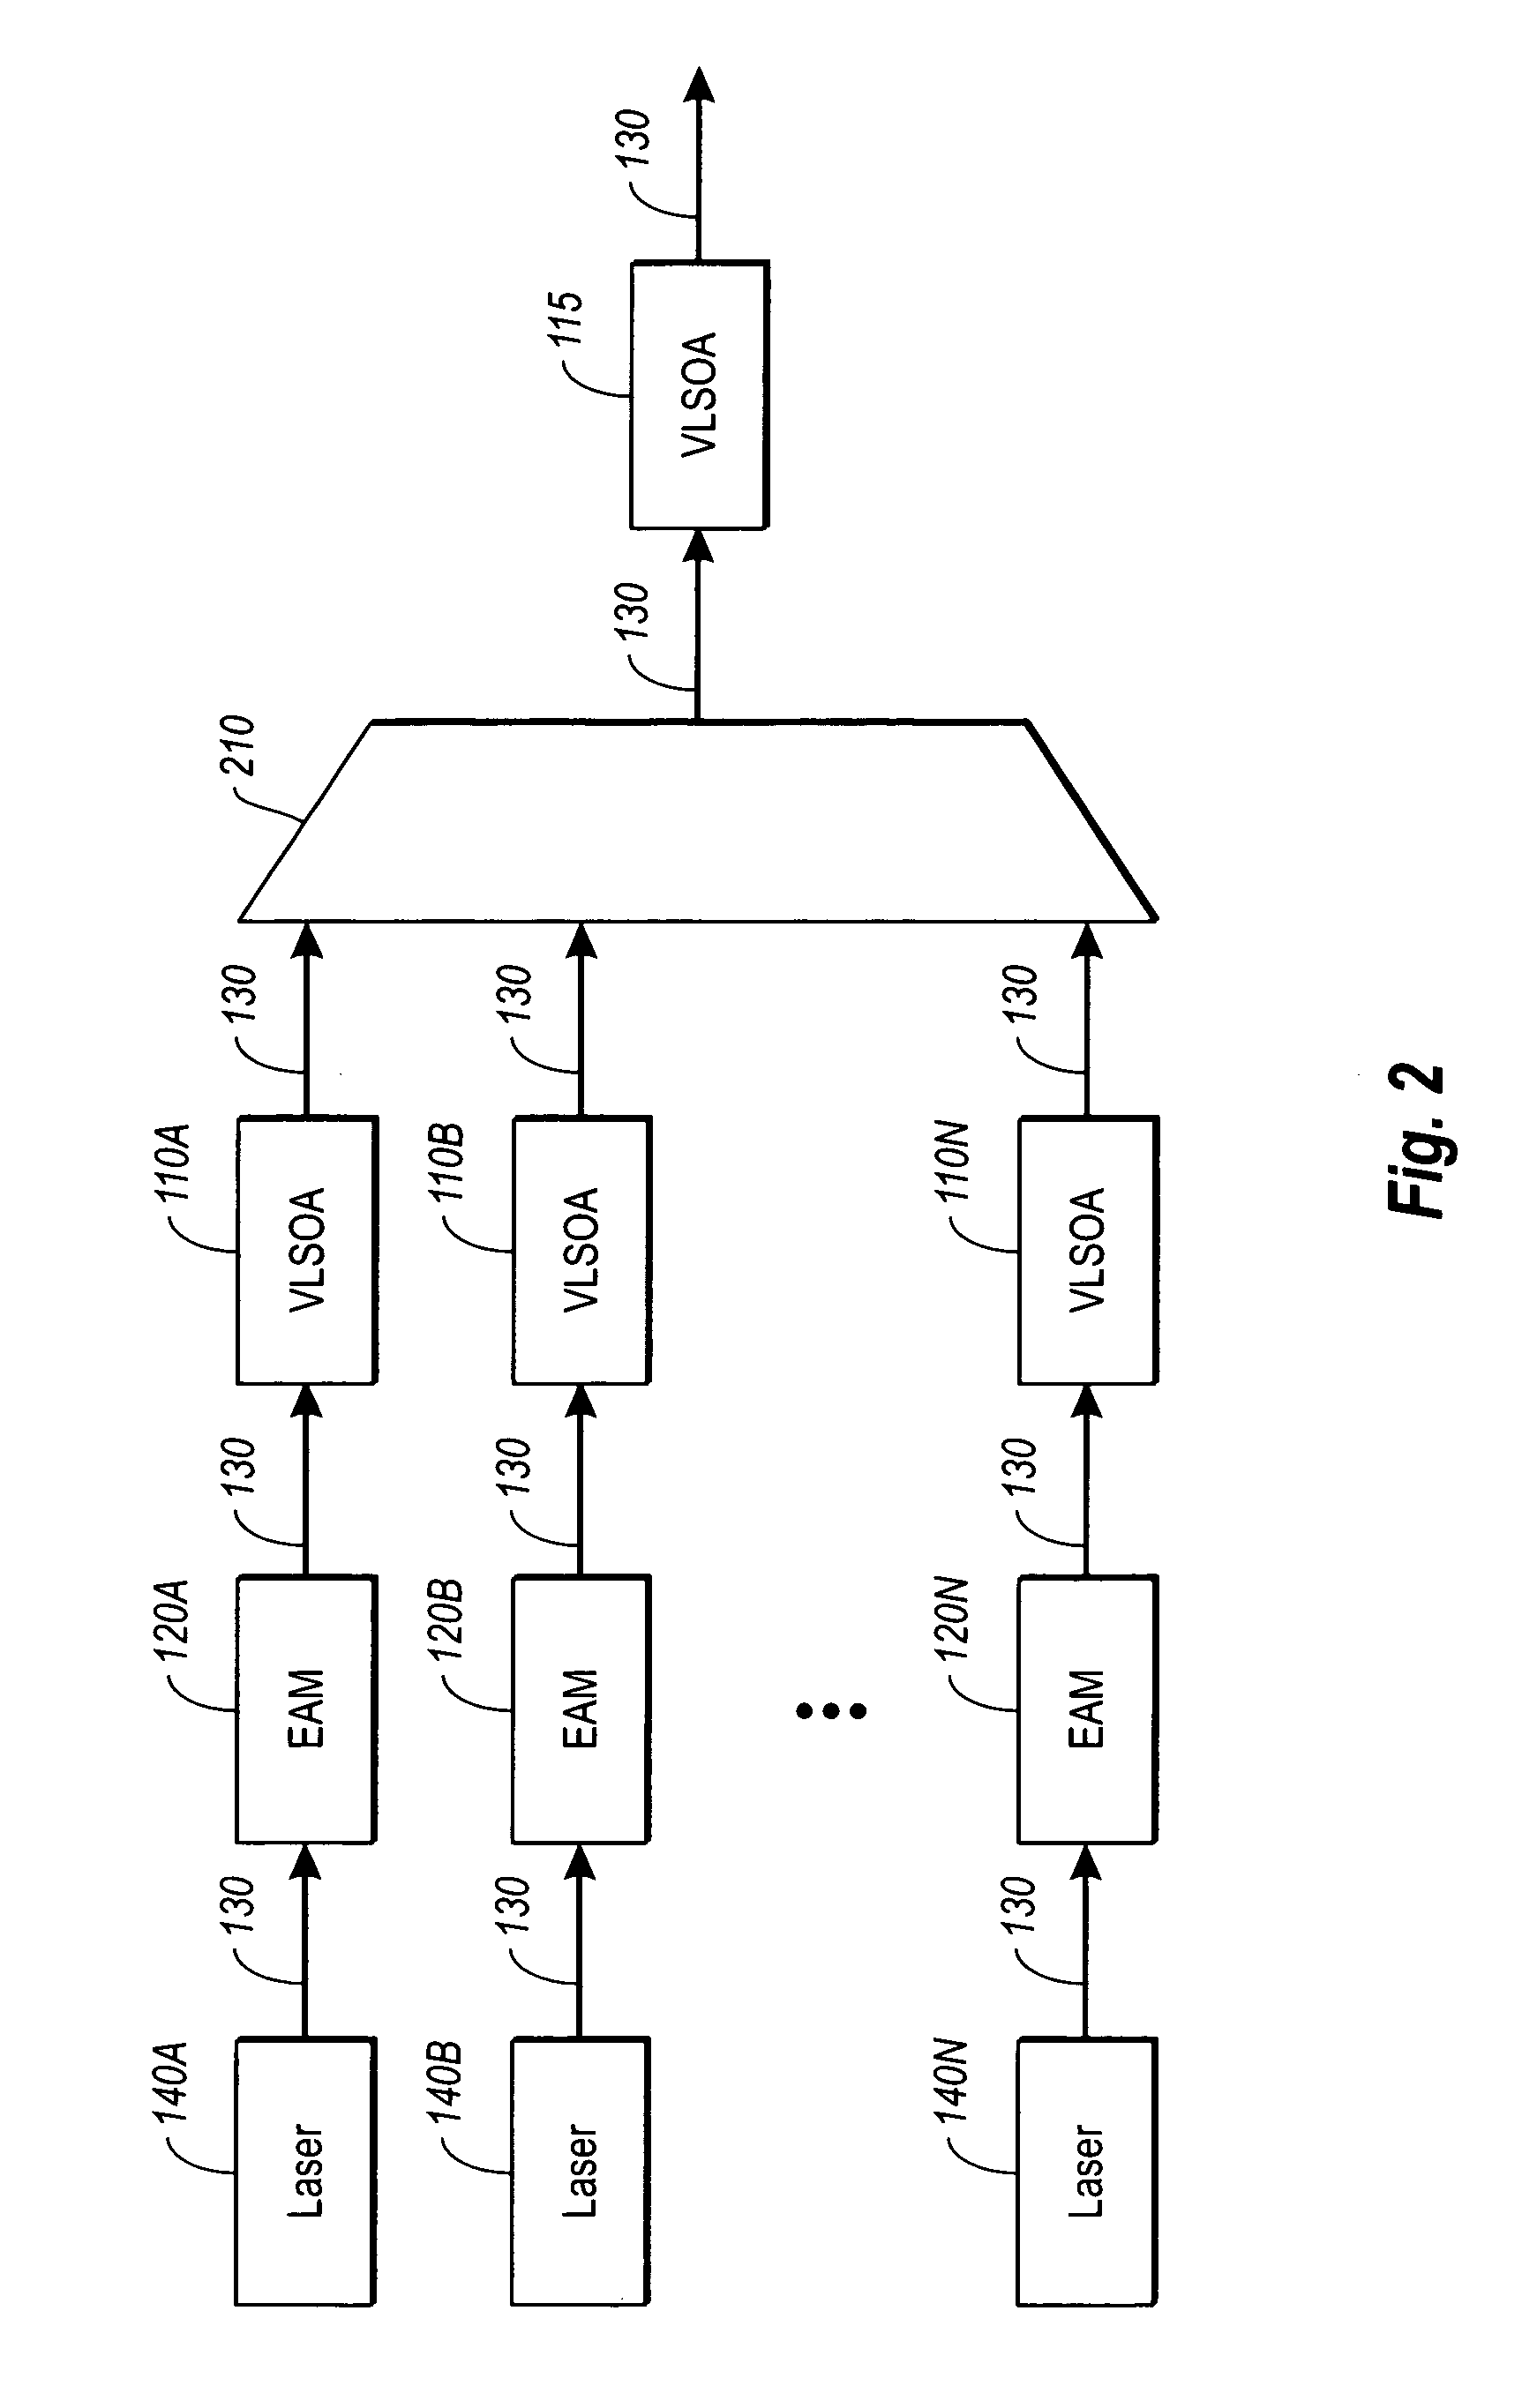 Optical transmitter including a linear semiconductor optical amplifier